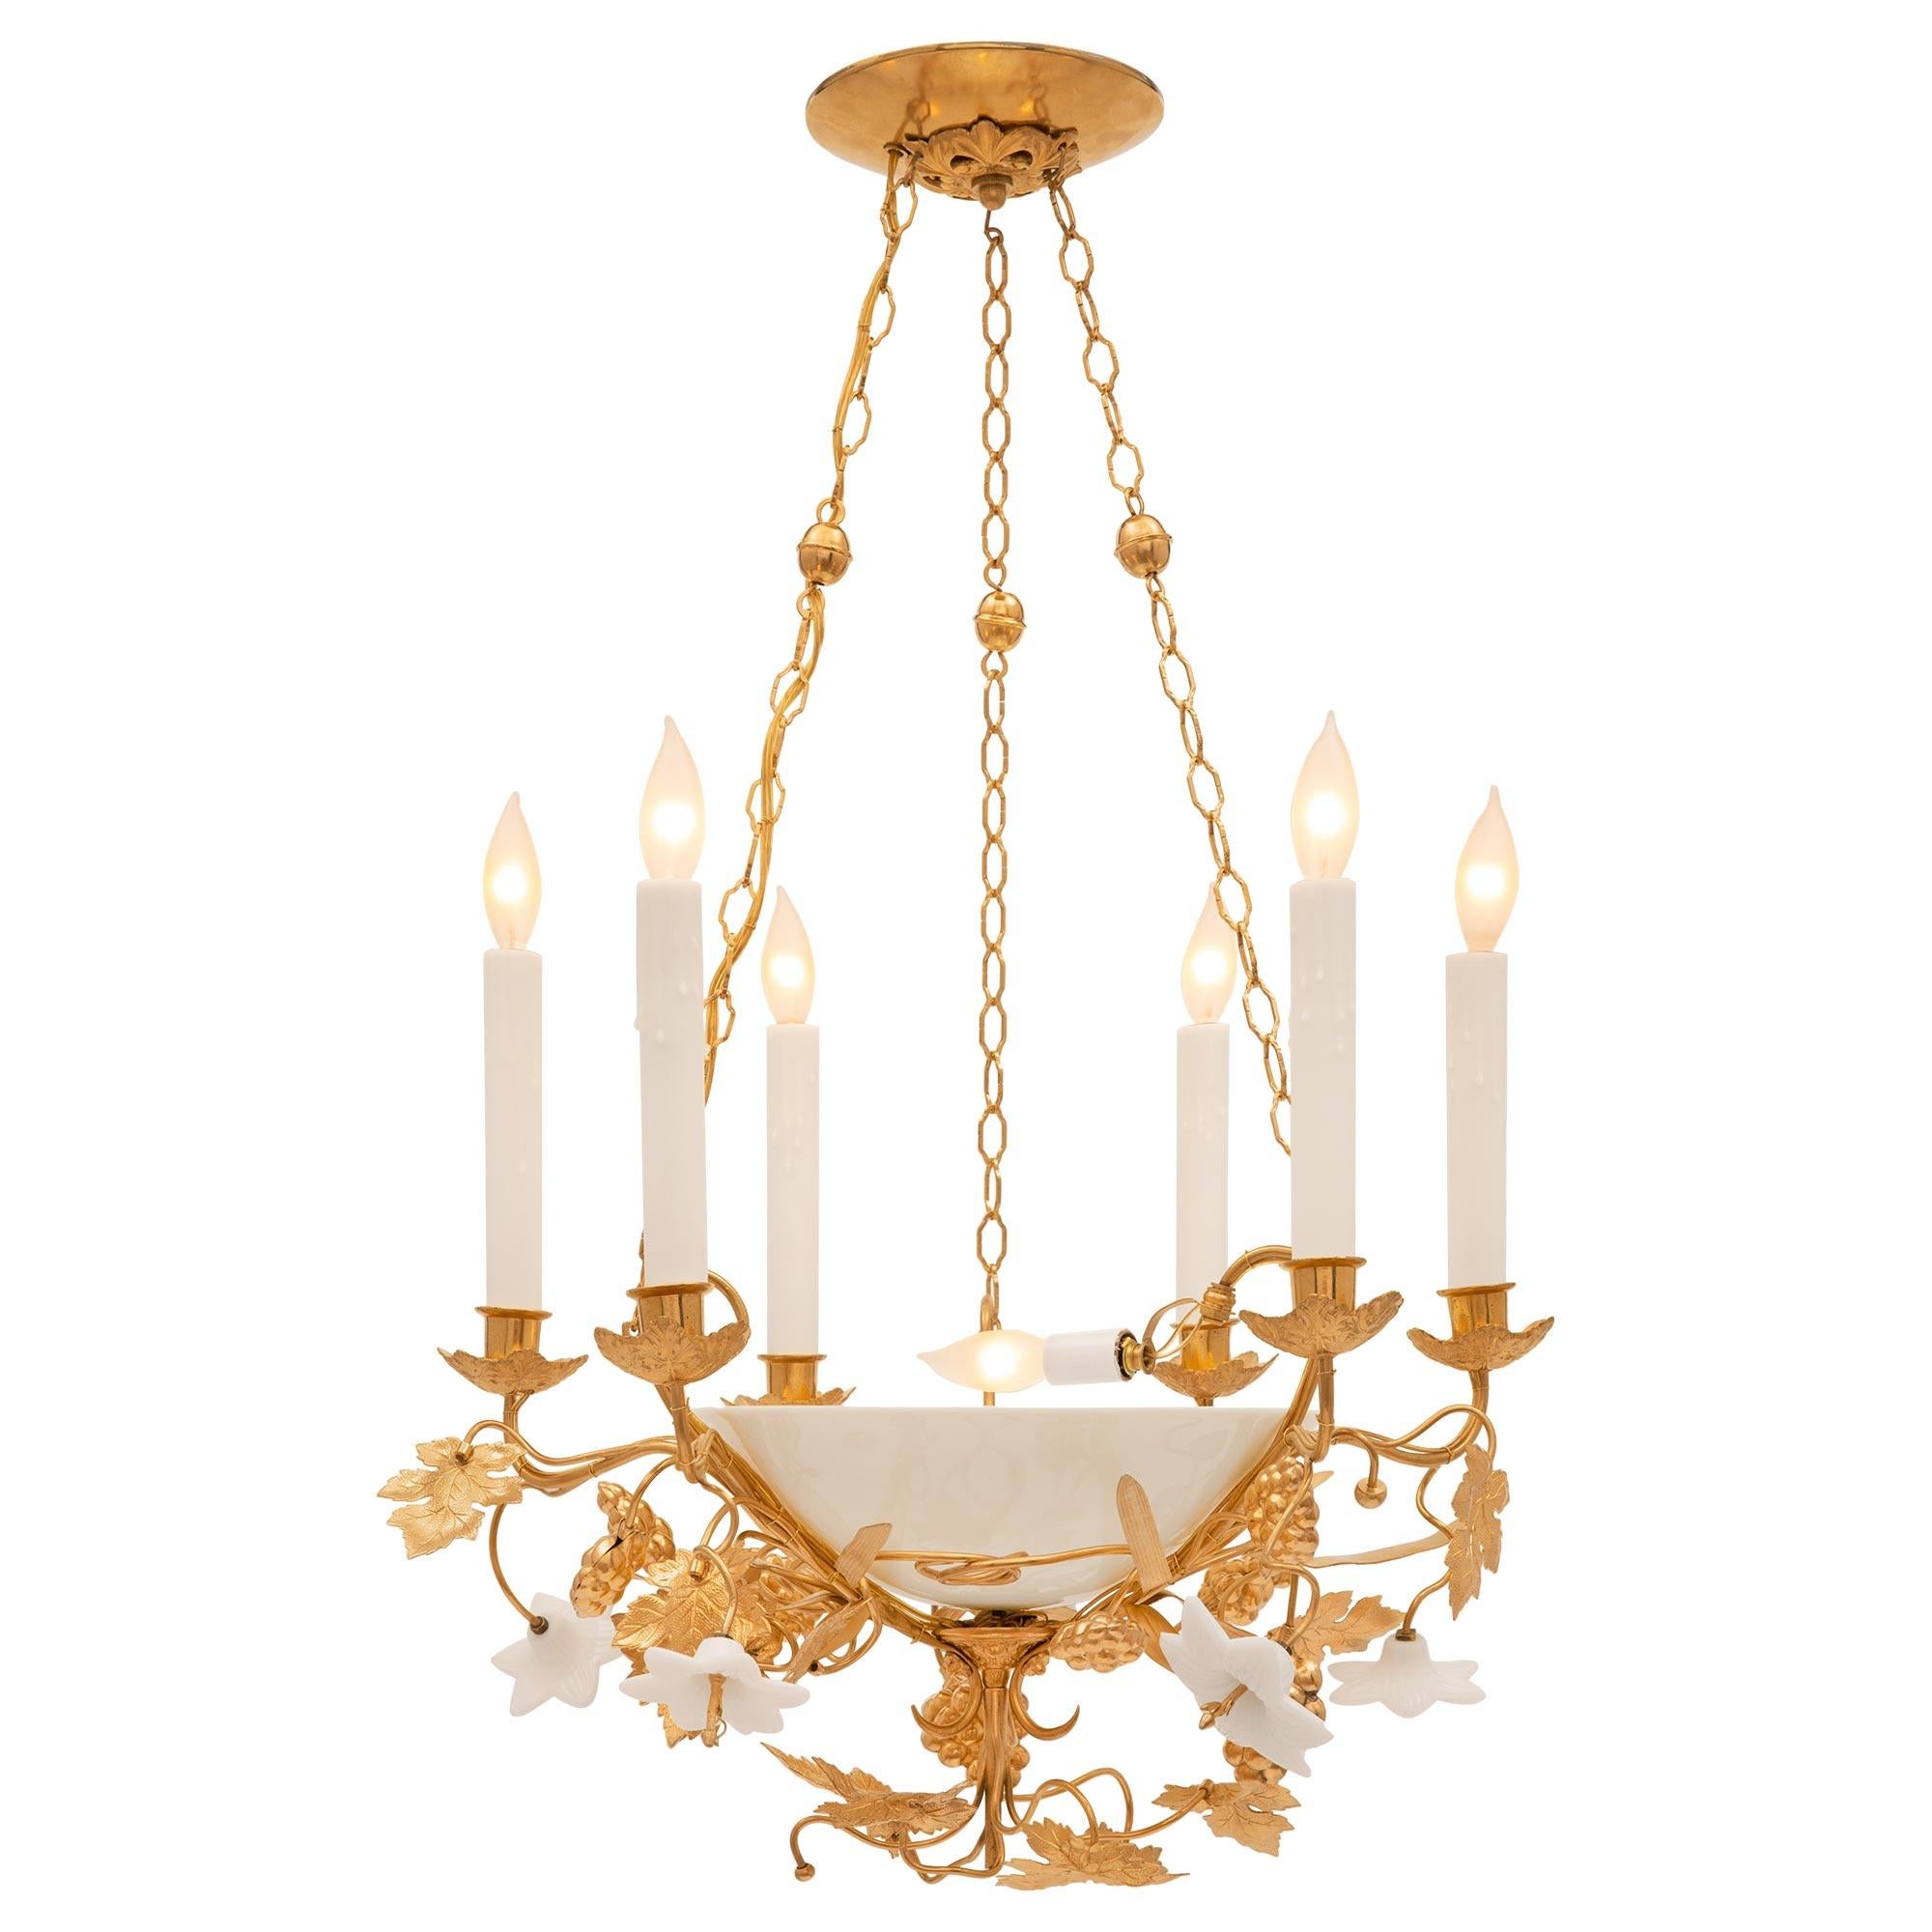 A unique and most decorative French 19th century Louis XVI st. ormolu and opaline chandelier. The six arm, seven bulb chandelier is centered by exquisite extremely decorative branch like designs with striking wonderfully executed leaves with fine